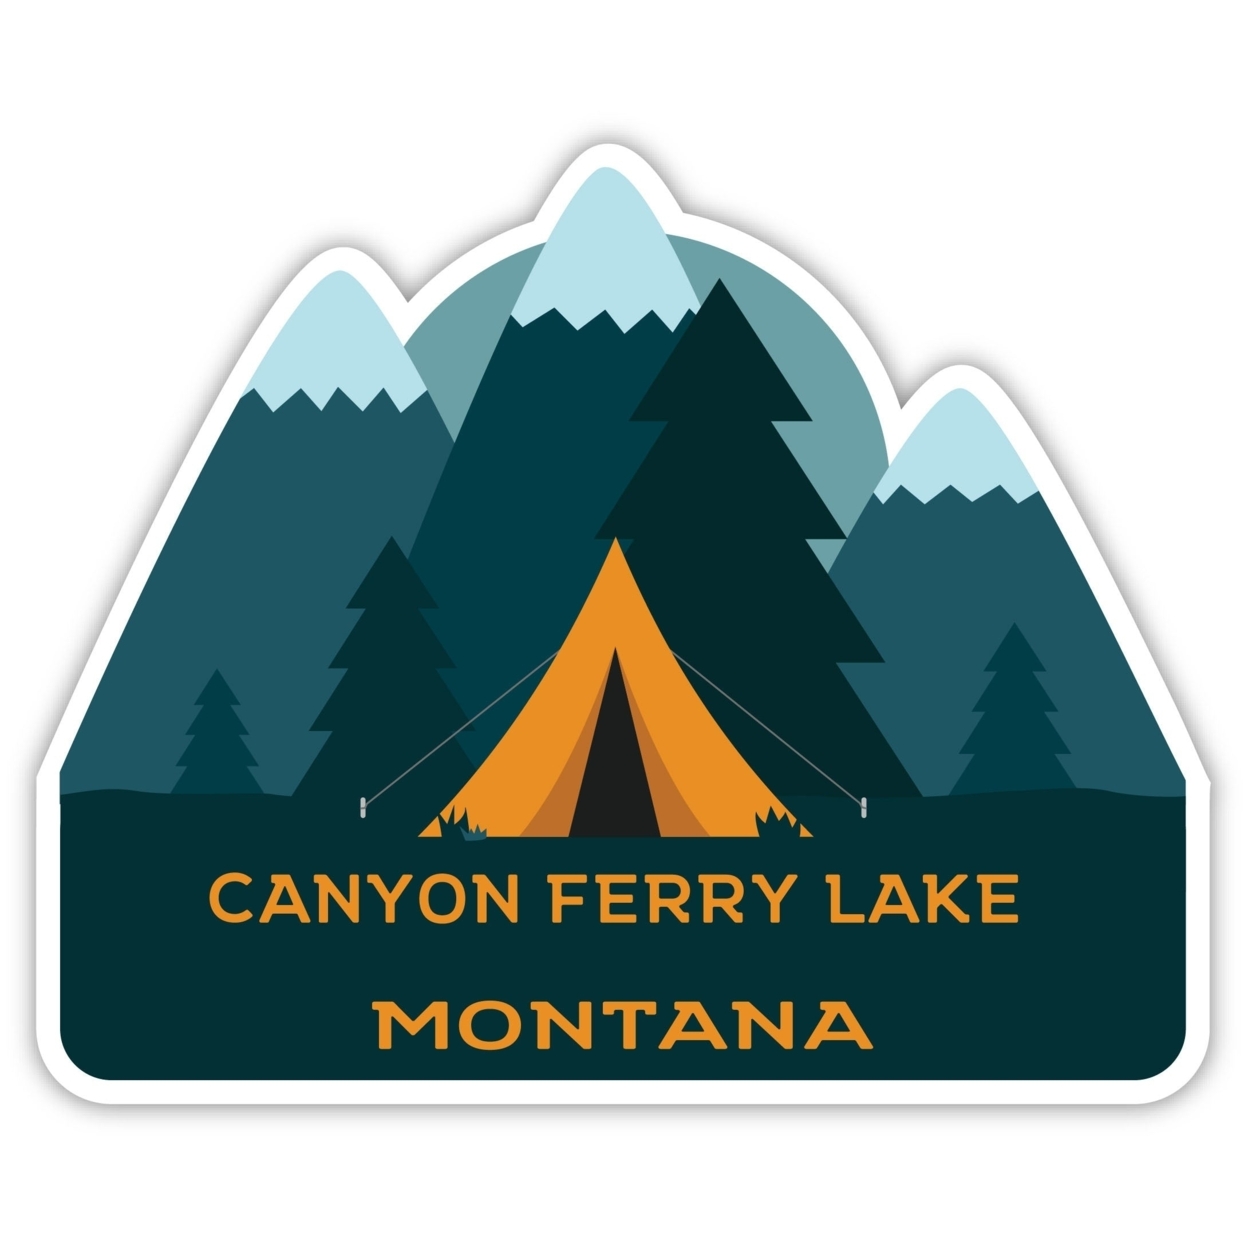 Canyon Ferry Lake Montana Souvenir Decorative Stickers (Choose Theme And Size) - 4-Pack, 10-Inch, Tent